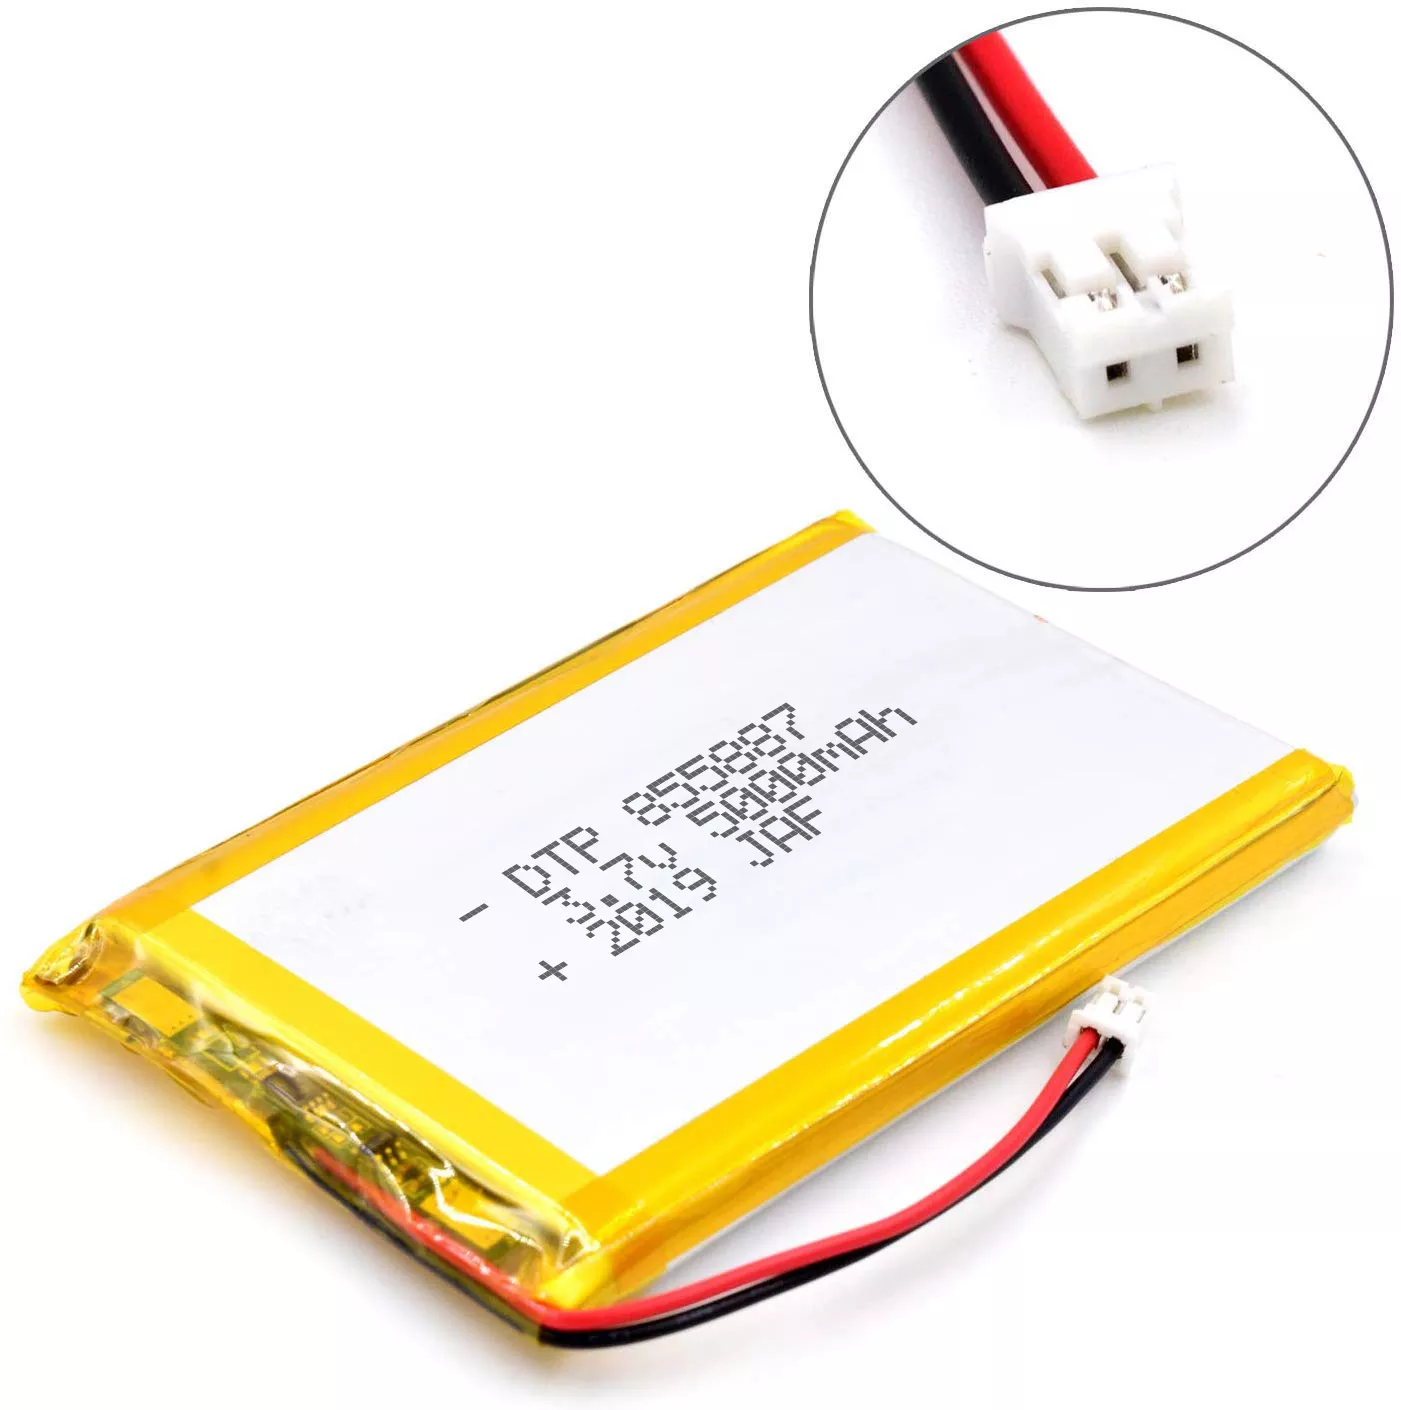 DTP 855887 large capacity 5000mah 3.7v lithium ion polymer battery rechargeable li ion battery for power bank